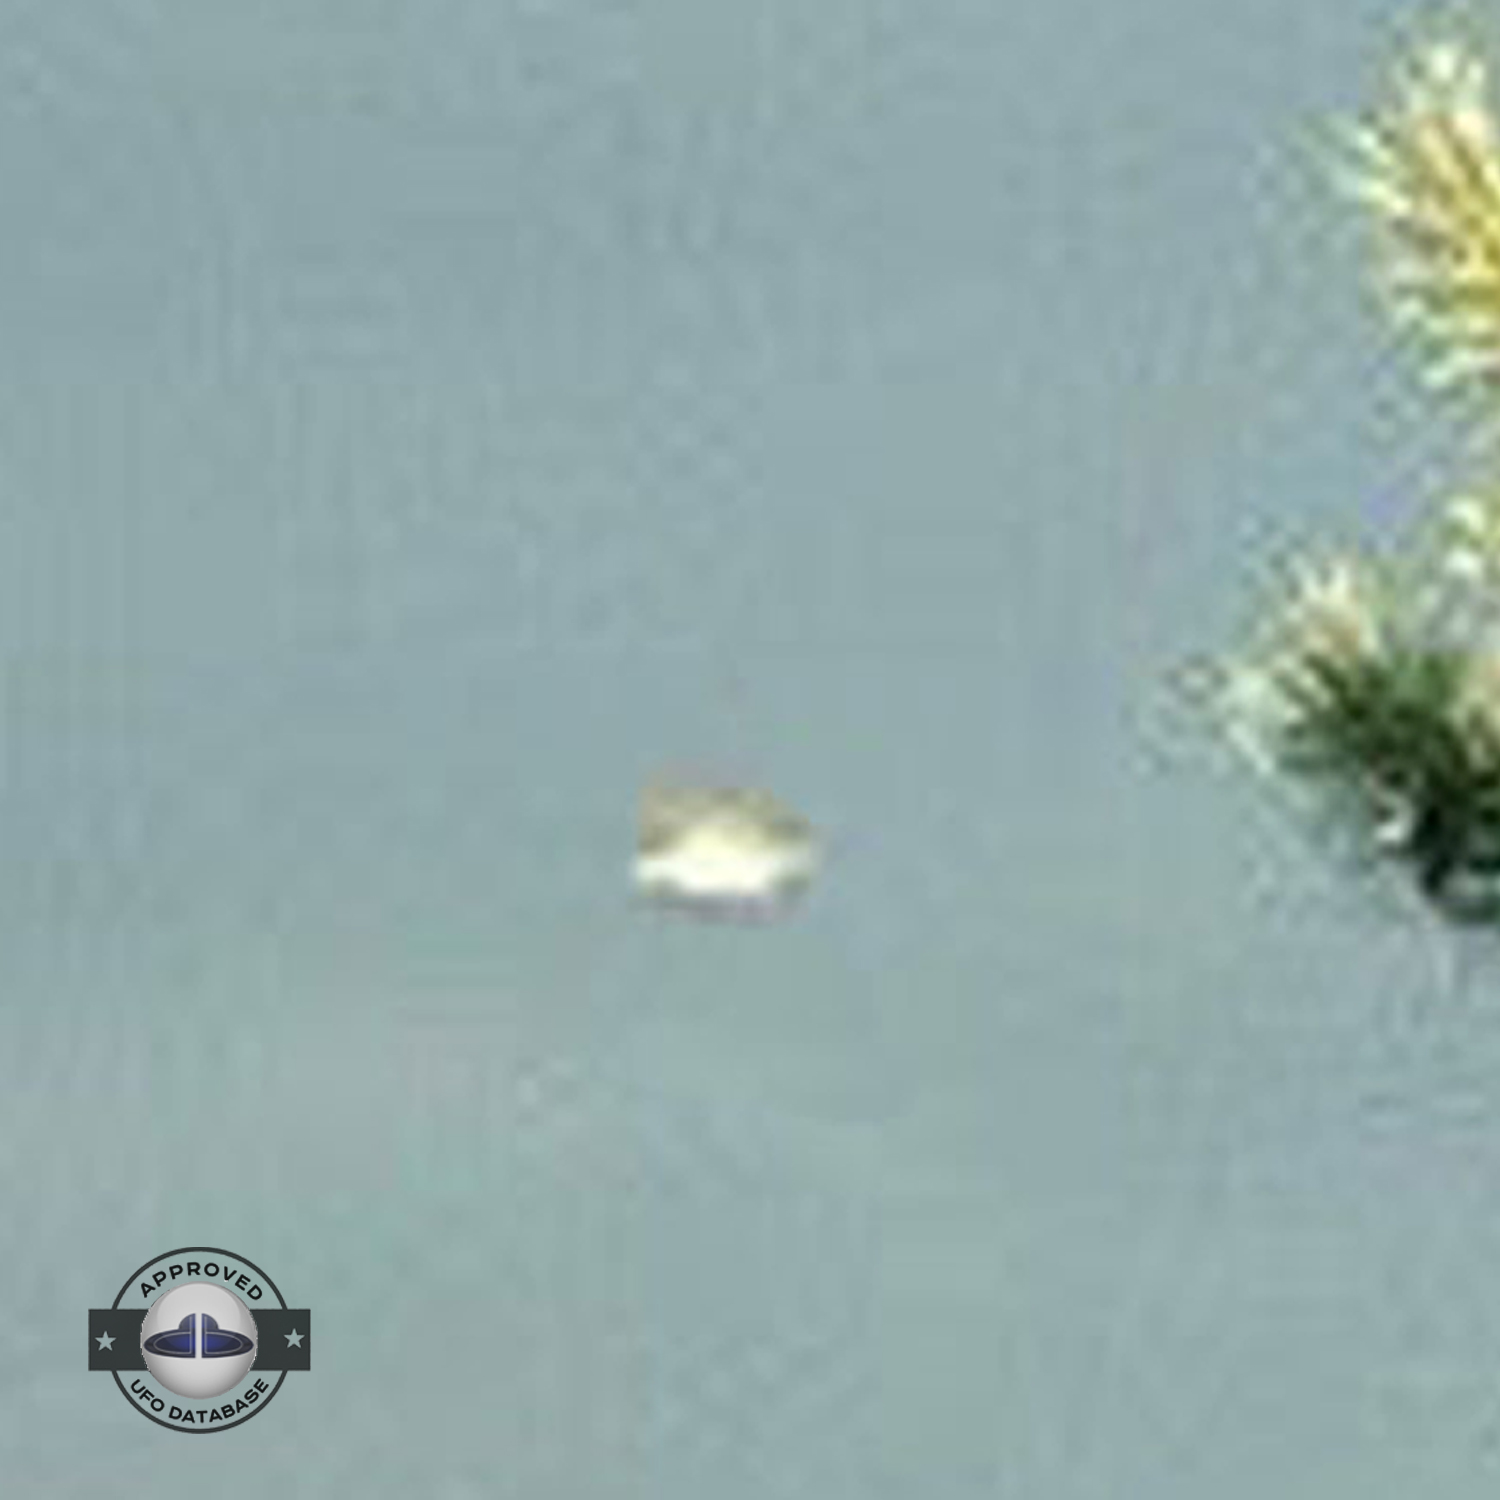 UFO picture - UFO passing in a sunset sky over houses | Watford, UK UFO Picture #142-6